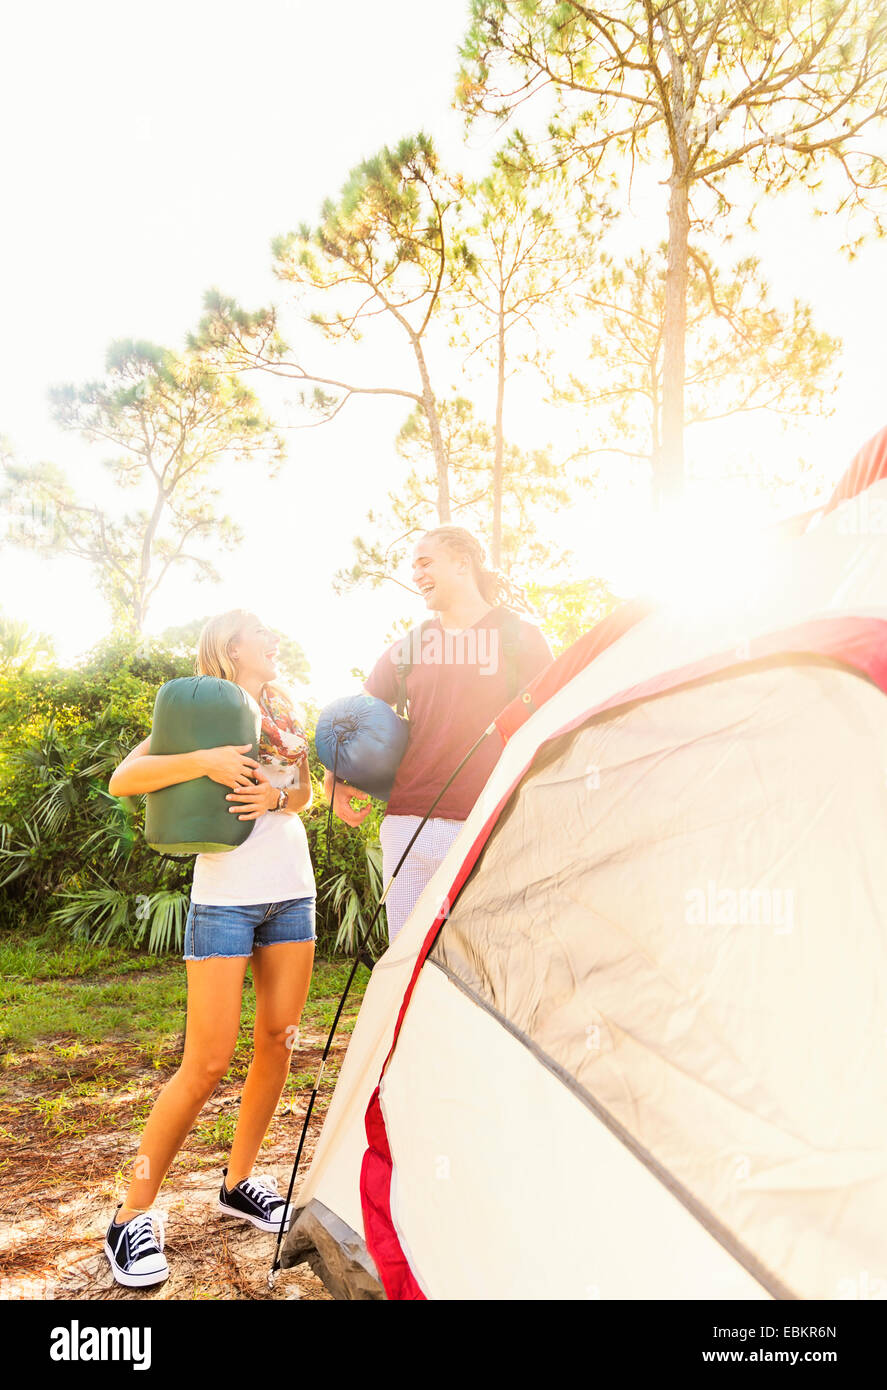 USA, Florida, Tequesta, Couple standing next to tent in forest Stock Photo